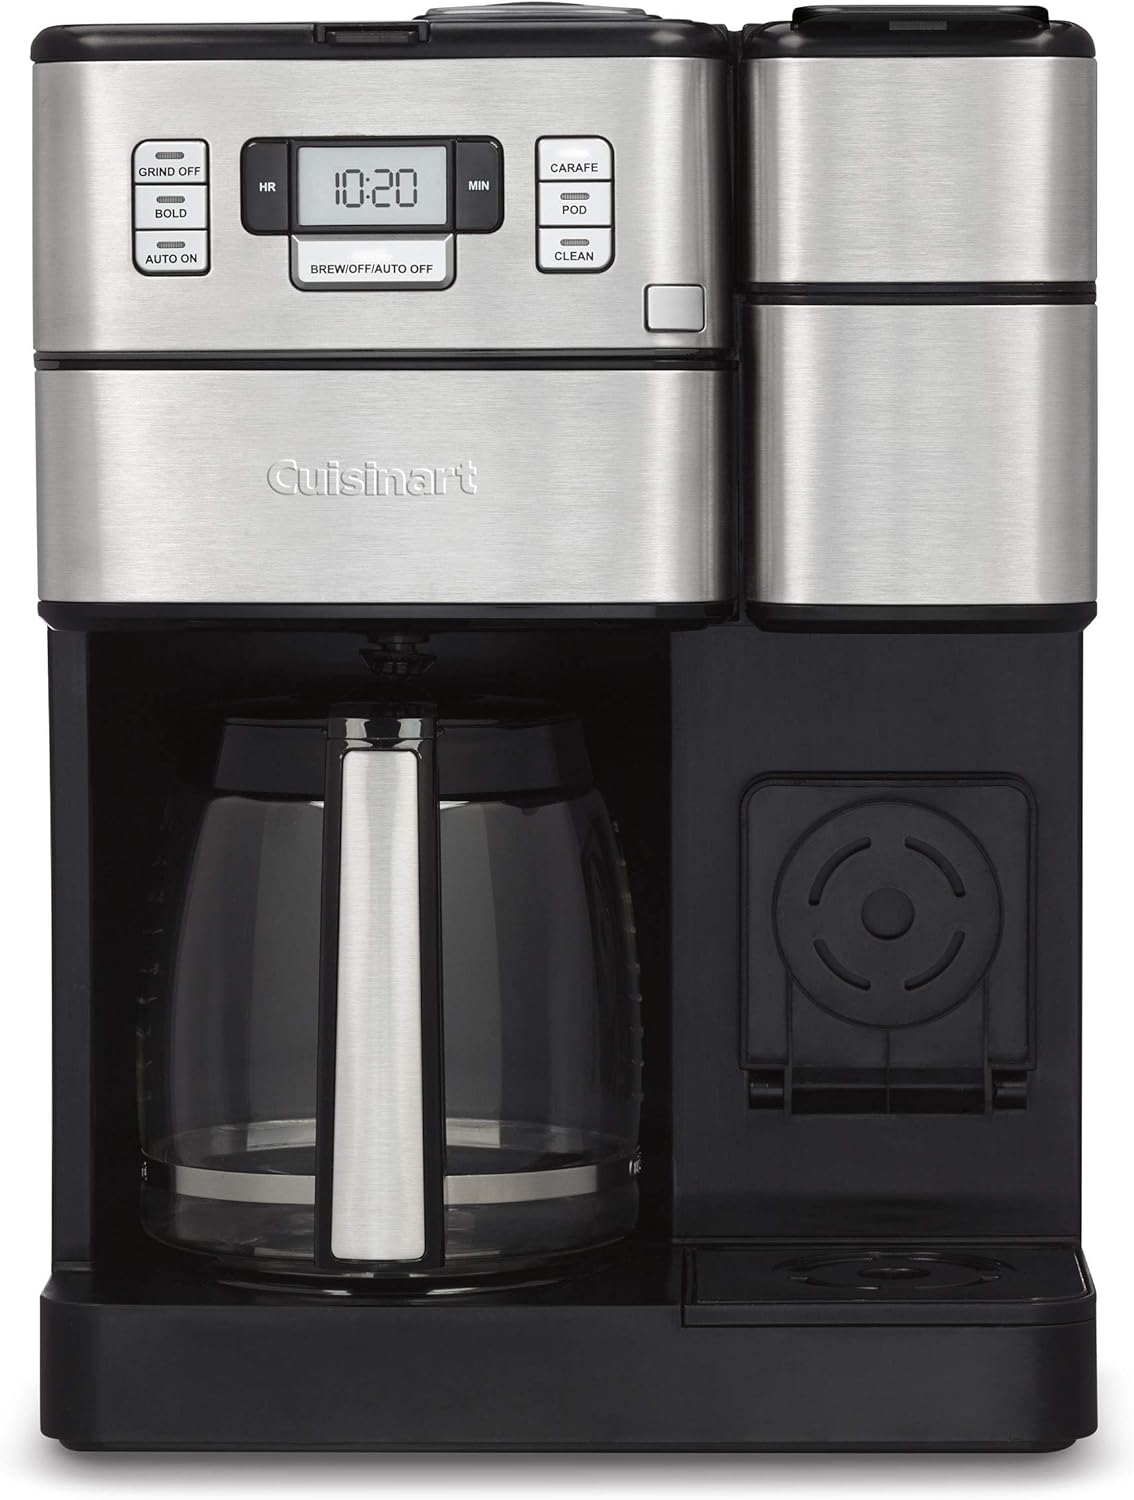 Cuisinart SS-GB1 Coffee Center Grind and Brew Plus, Built-in Coffee Grinder